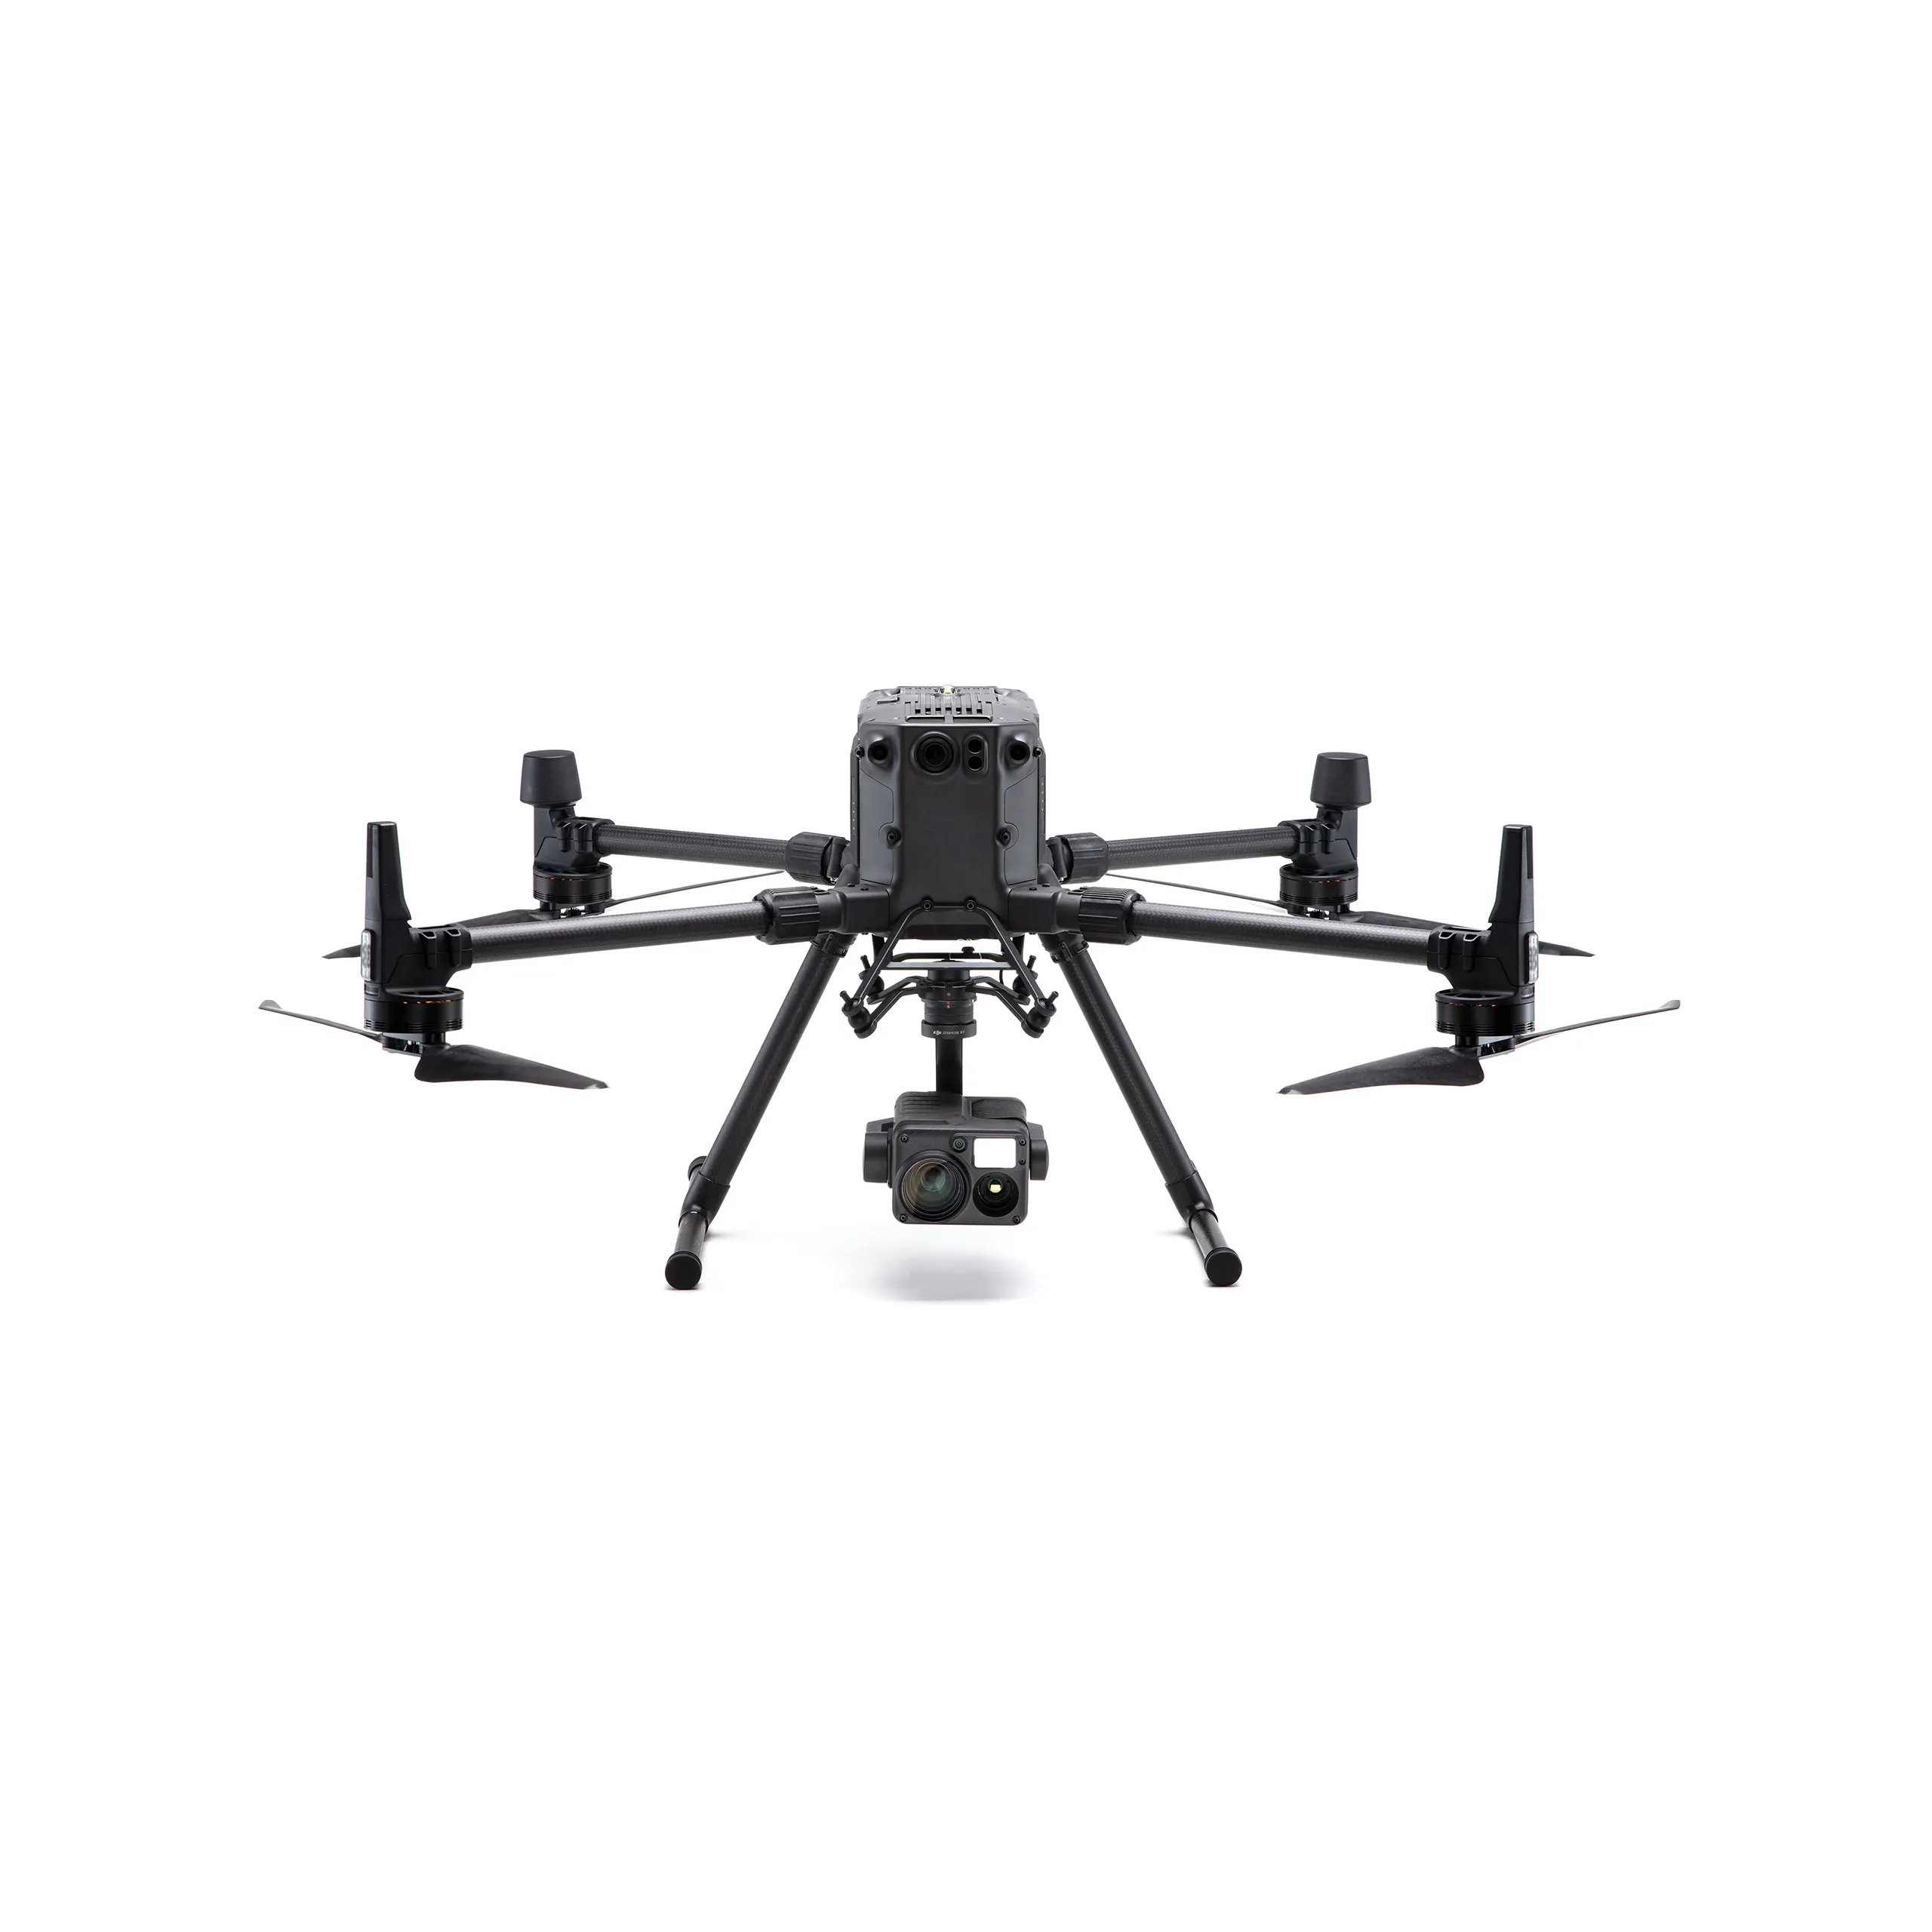 Sky Fly DJI Matrice 300 RTK M300 with Manual Control and Automatically open function Thermal imaging professional camera drones